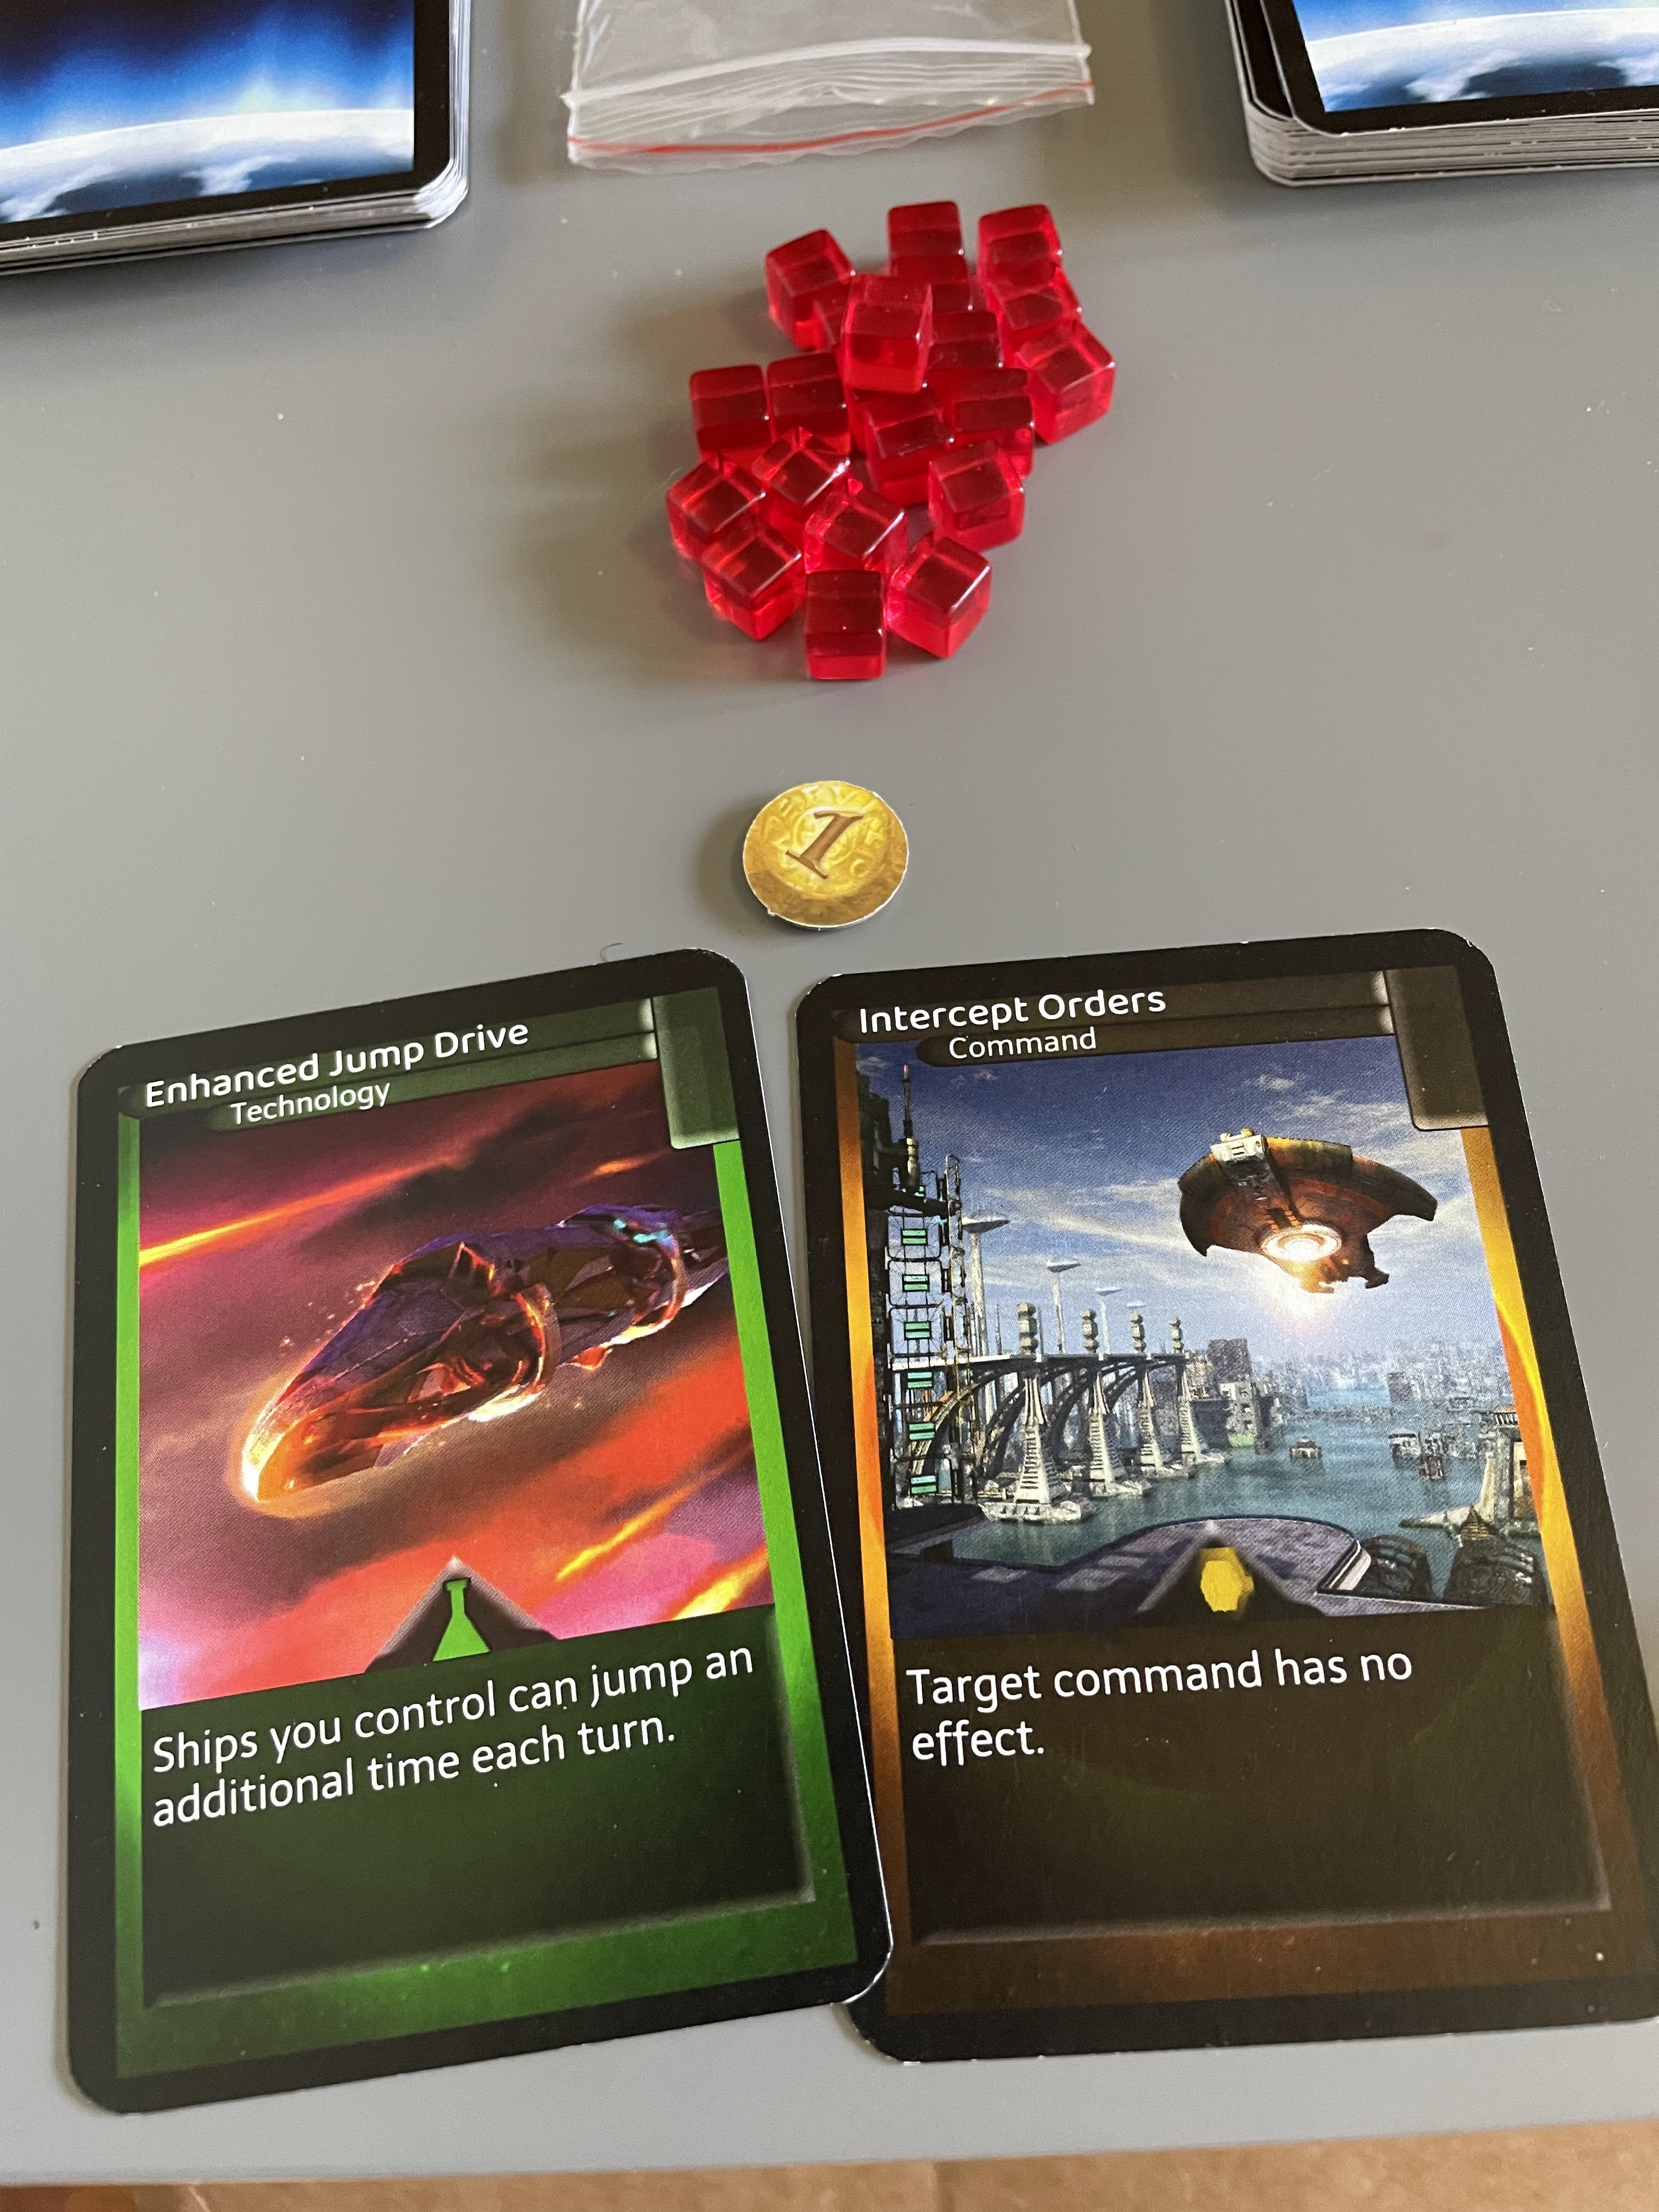 A Science card, titled Enhanced Jump Drive, and a Politics card, titled Intercept Orders.